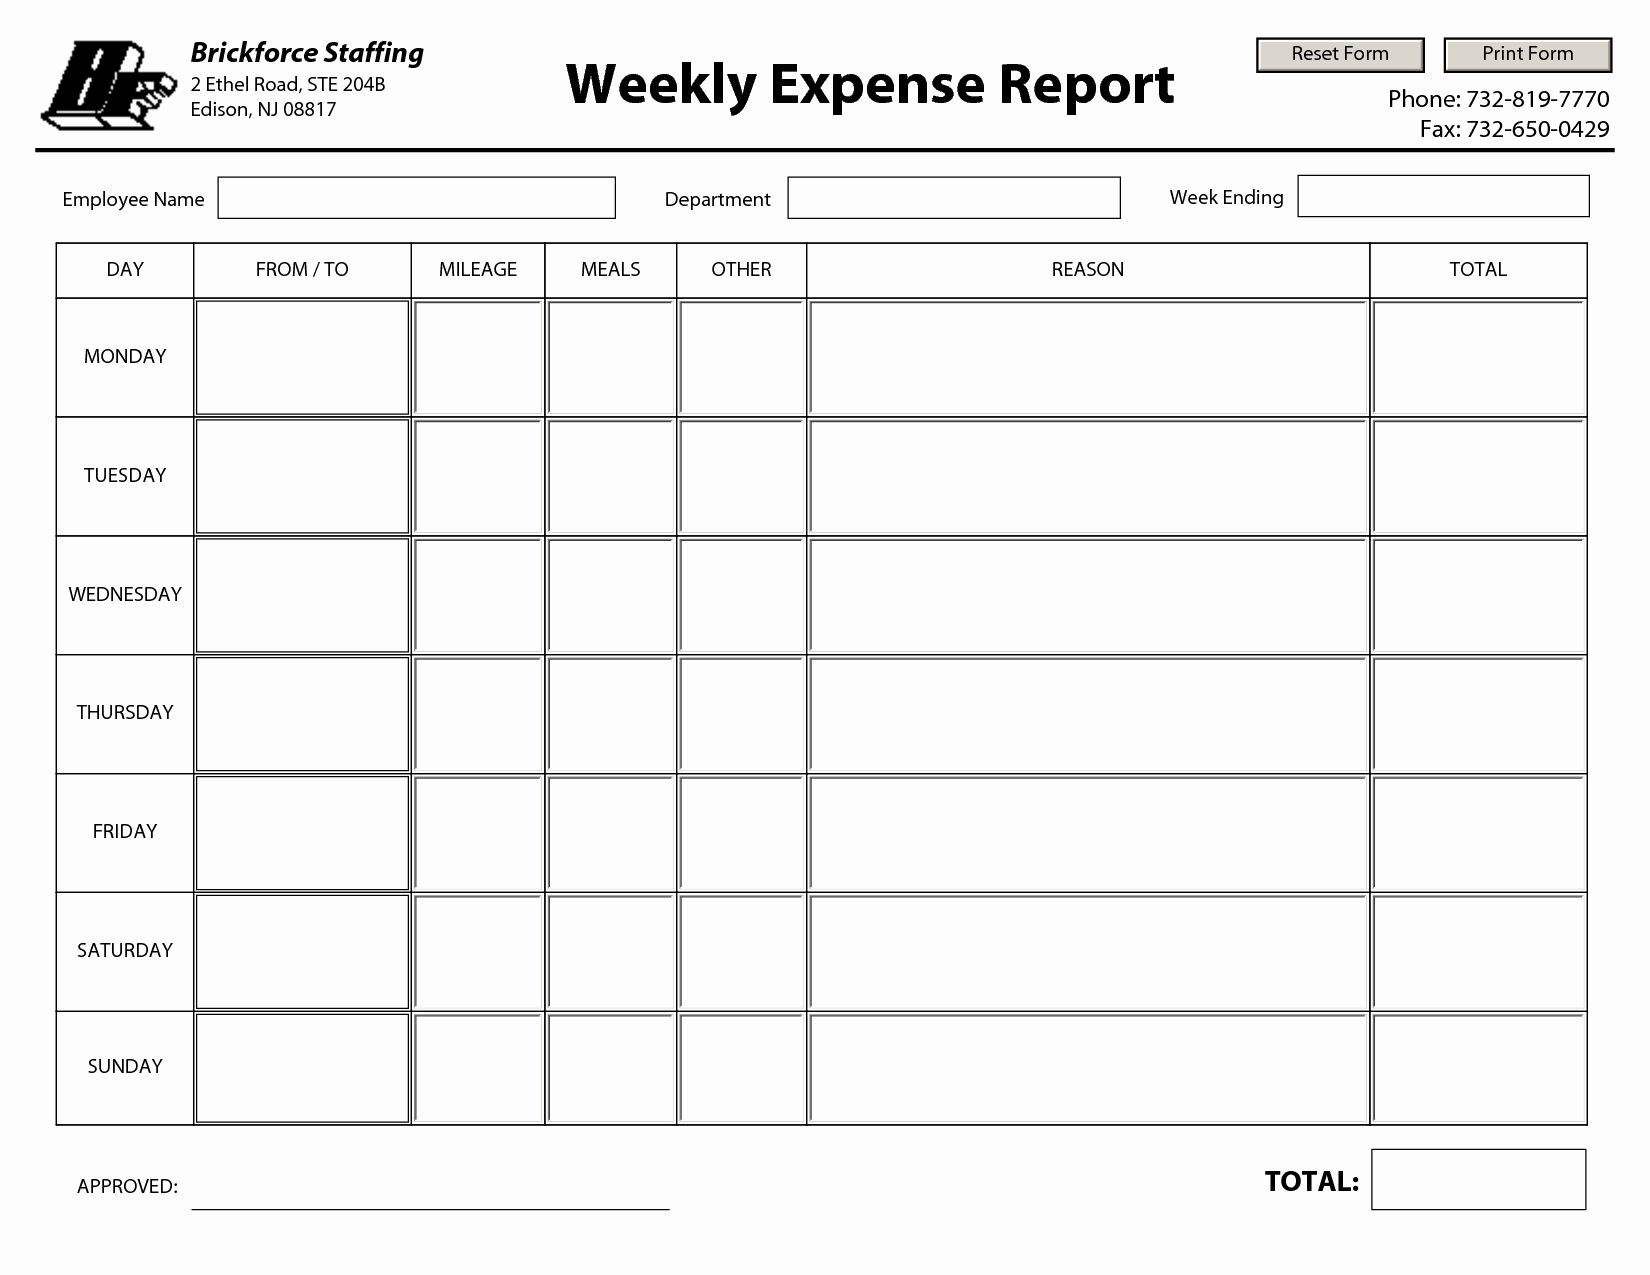 Excel Expense Report Template Free Luxury 7 Best Of Free Printable Weekly Expense Report